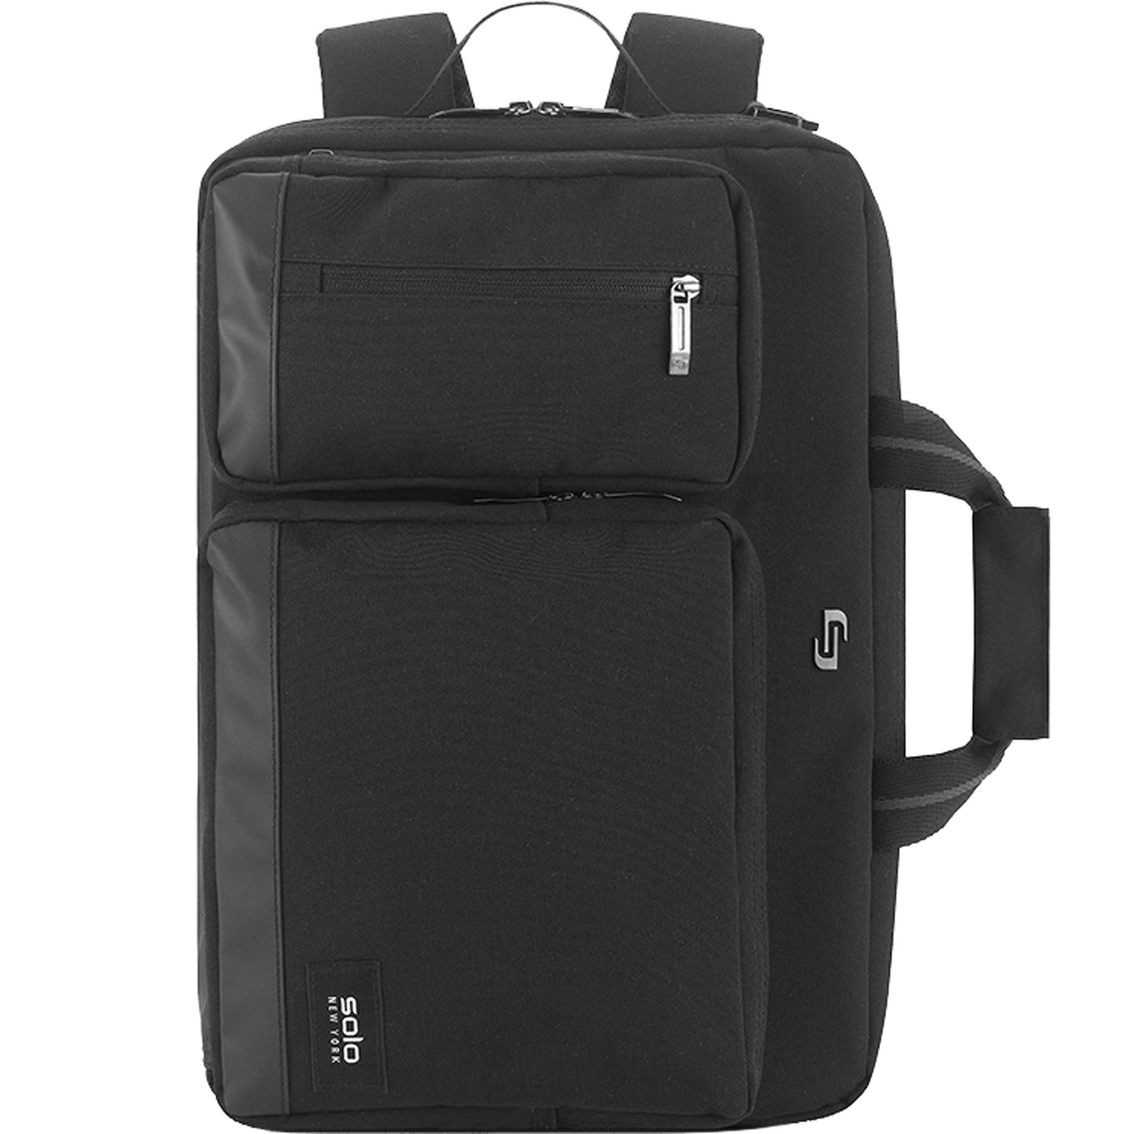 Solo Duane Hybrid 15.6 in. Briefcase - Image 2 of 6